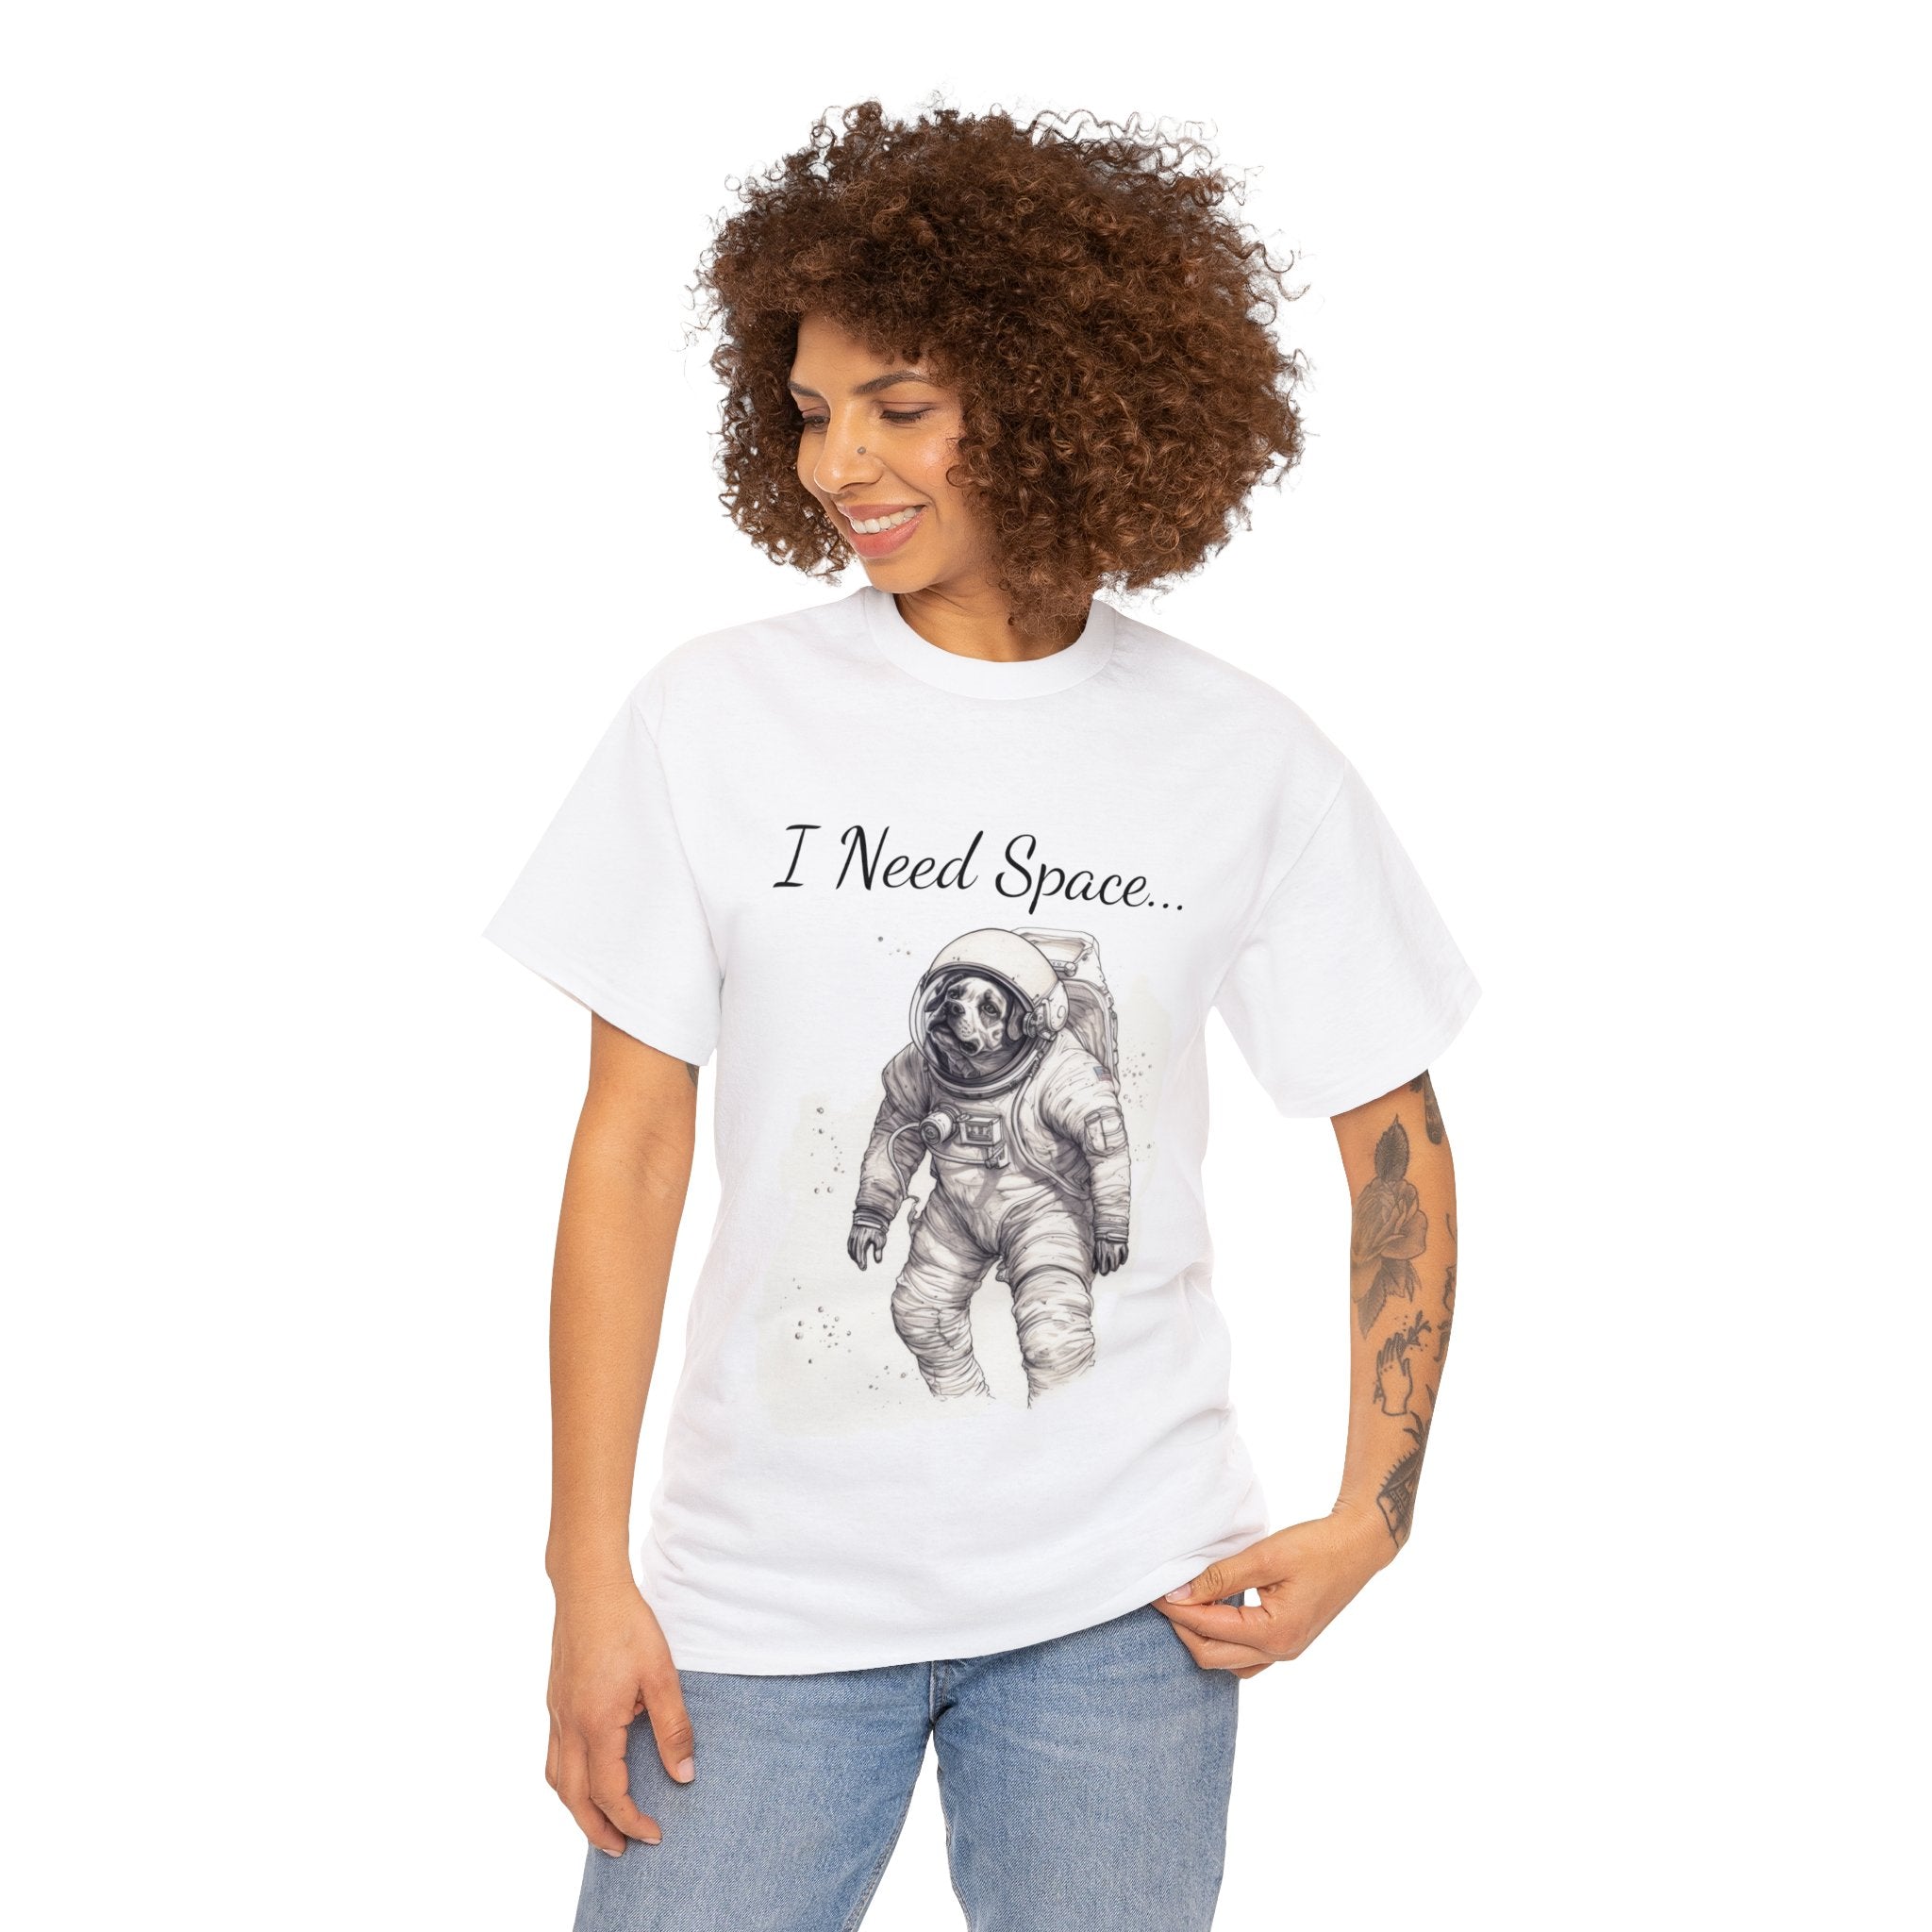 "Astronaut Dog 'I Need Space' Exploration Adventure Unisex Heavy Cotton Tee - Cosmic Canine Whimsy & Galactic Humor Design: A Stellar Fashion Statement"